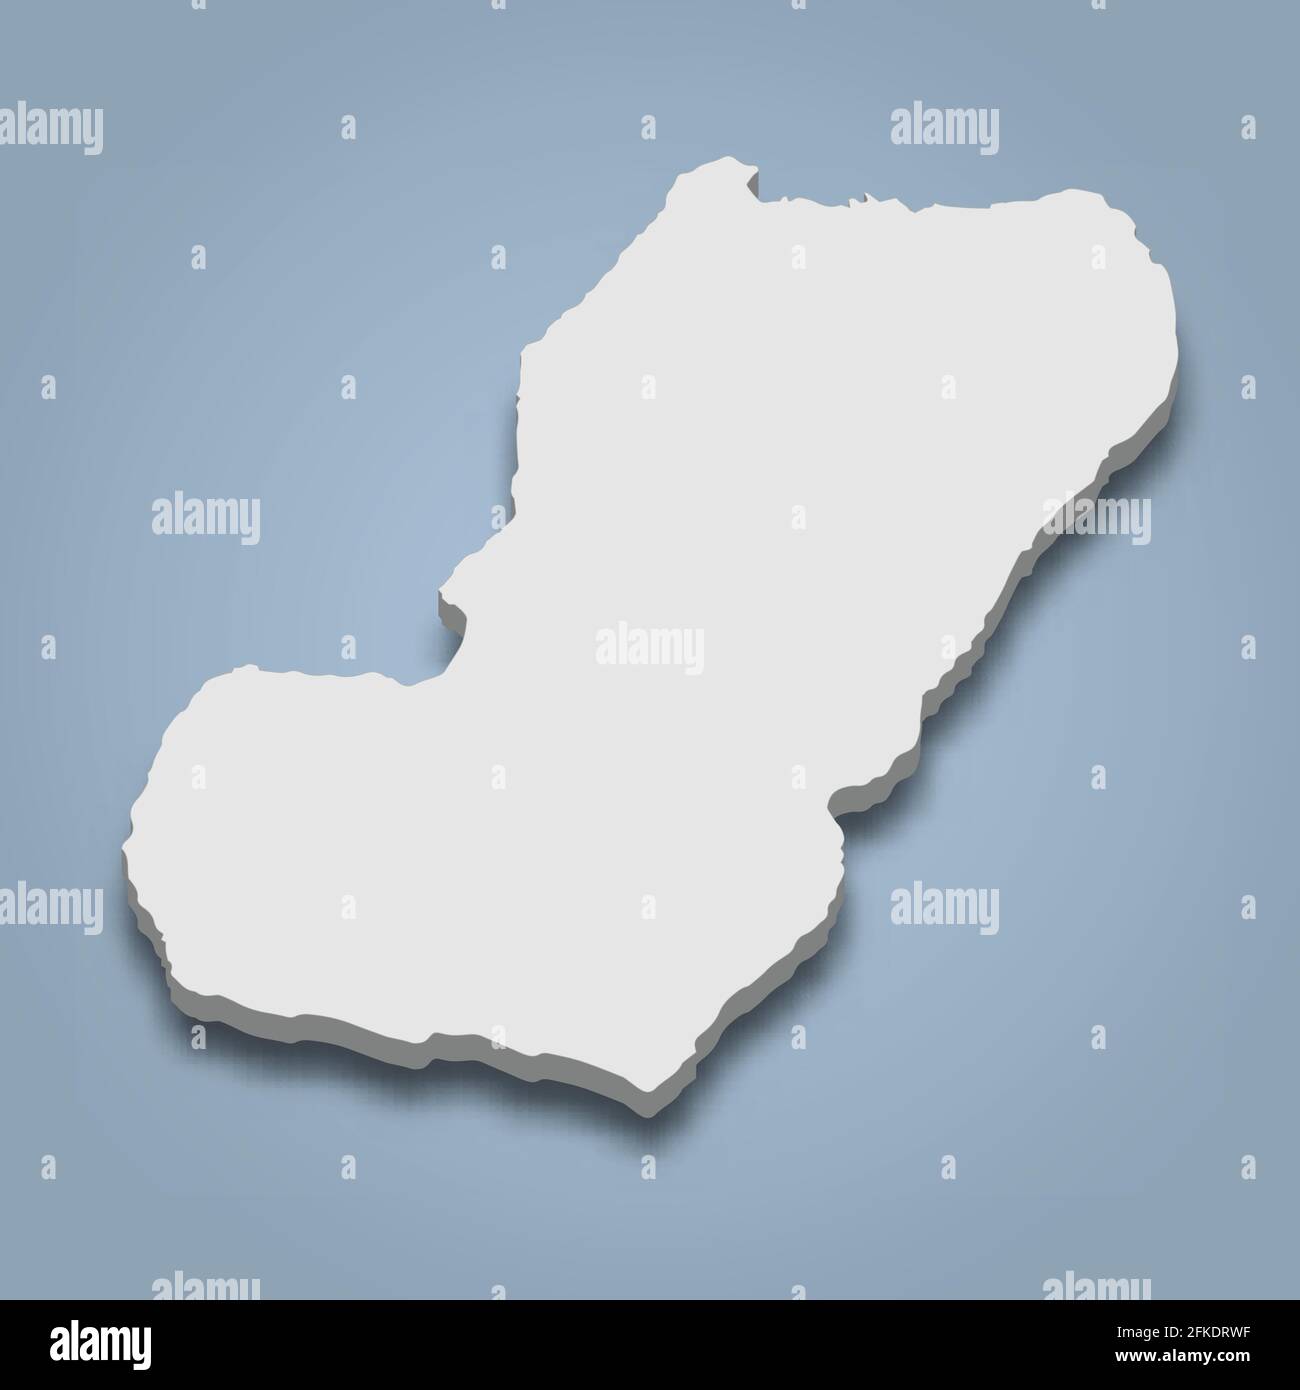 3d isometric map of Bioko is an island in Equatorial Guinea, isolated vector illustration Stock Vector